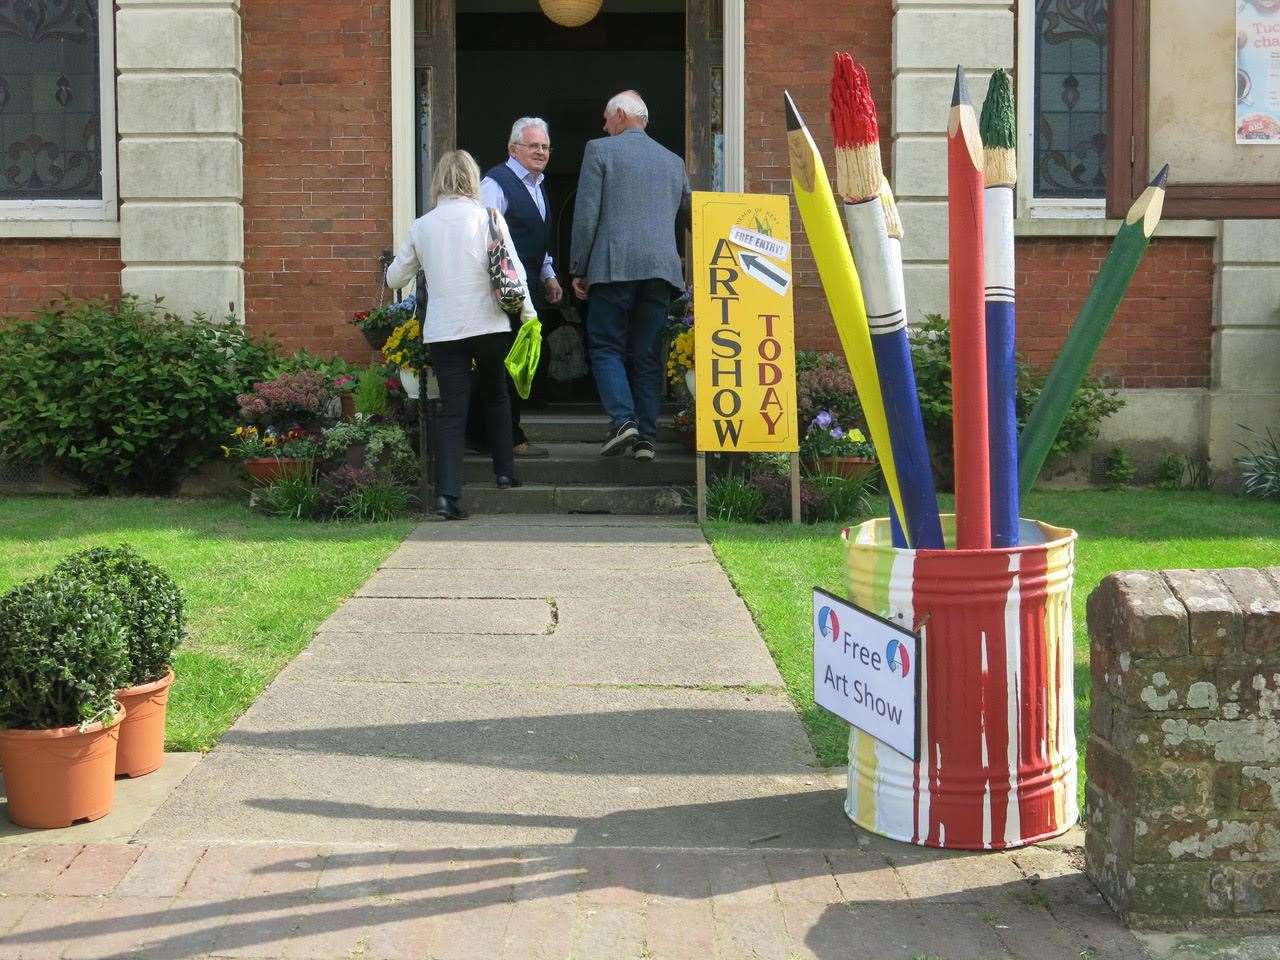 Three giant pencils were stolen from outside Weald of Kent Art Society's show at Hightbury Hall. They have since been returned (7930267)